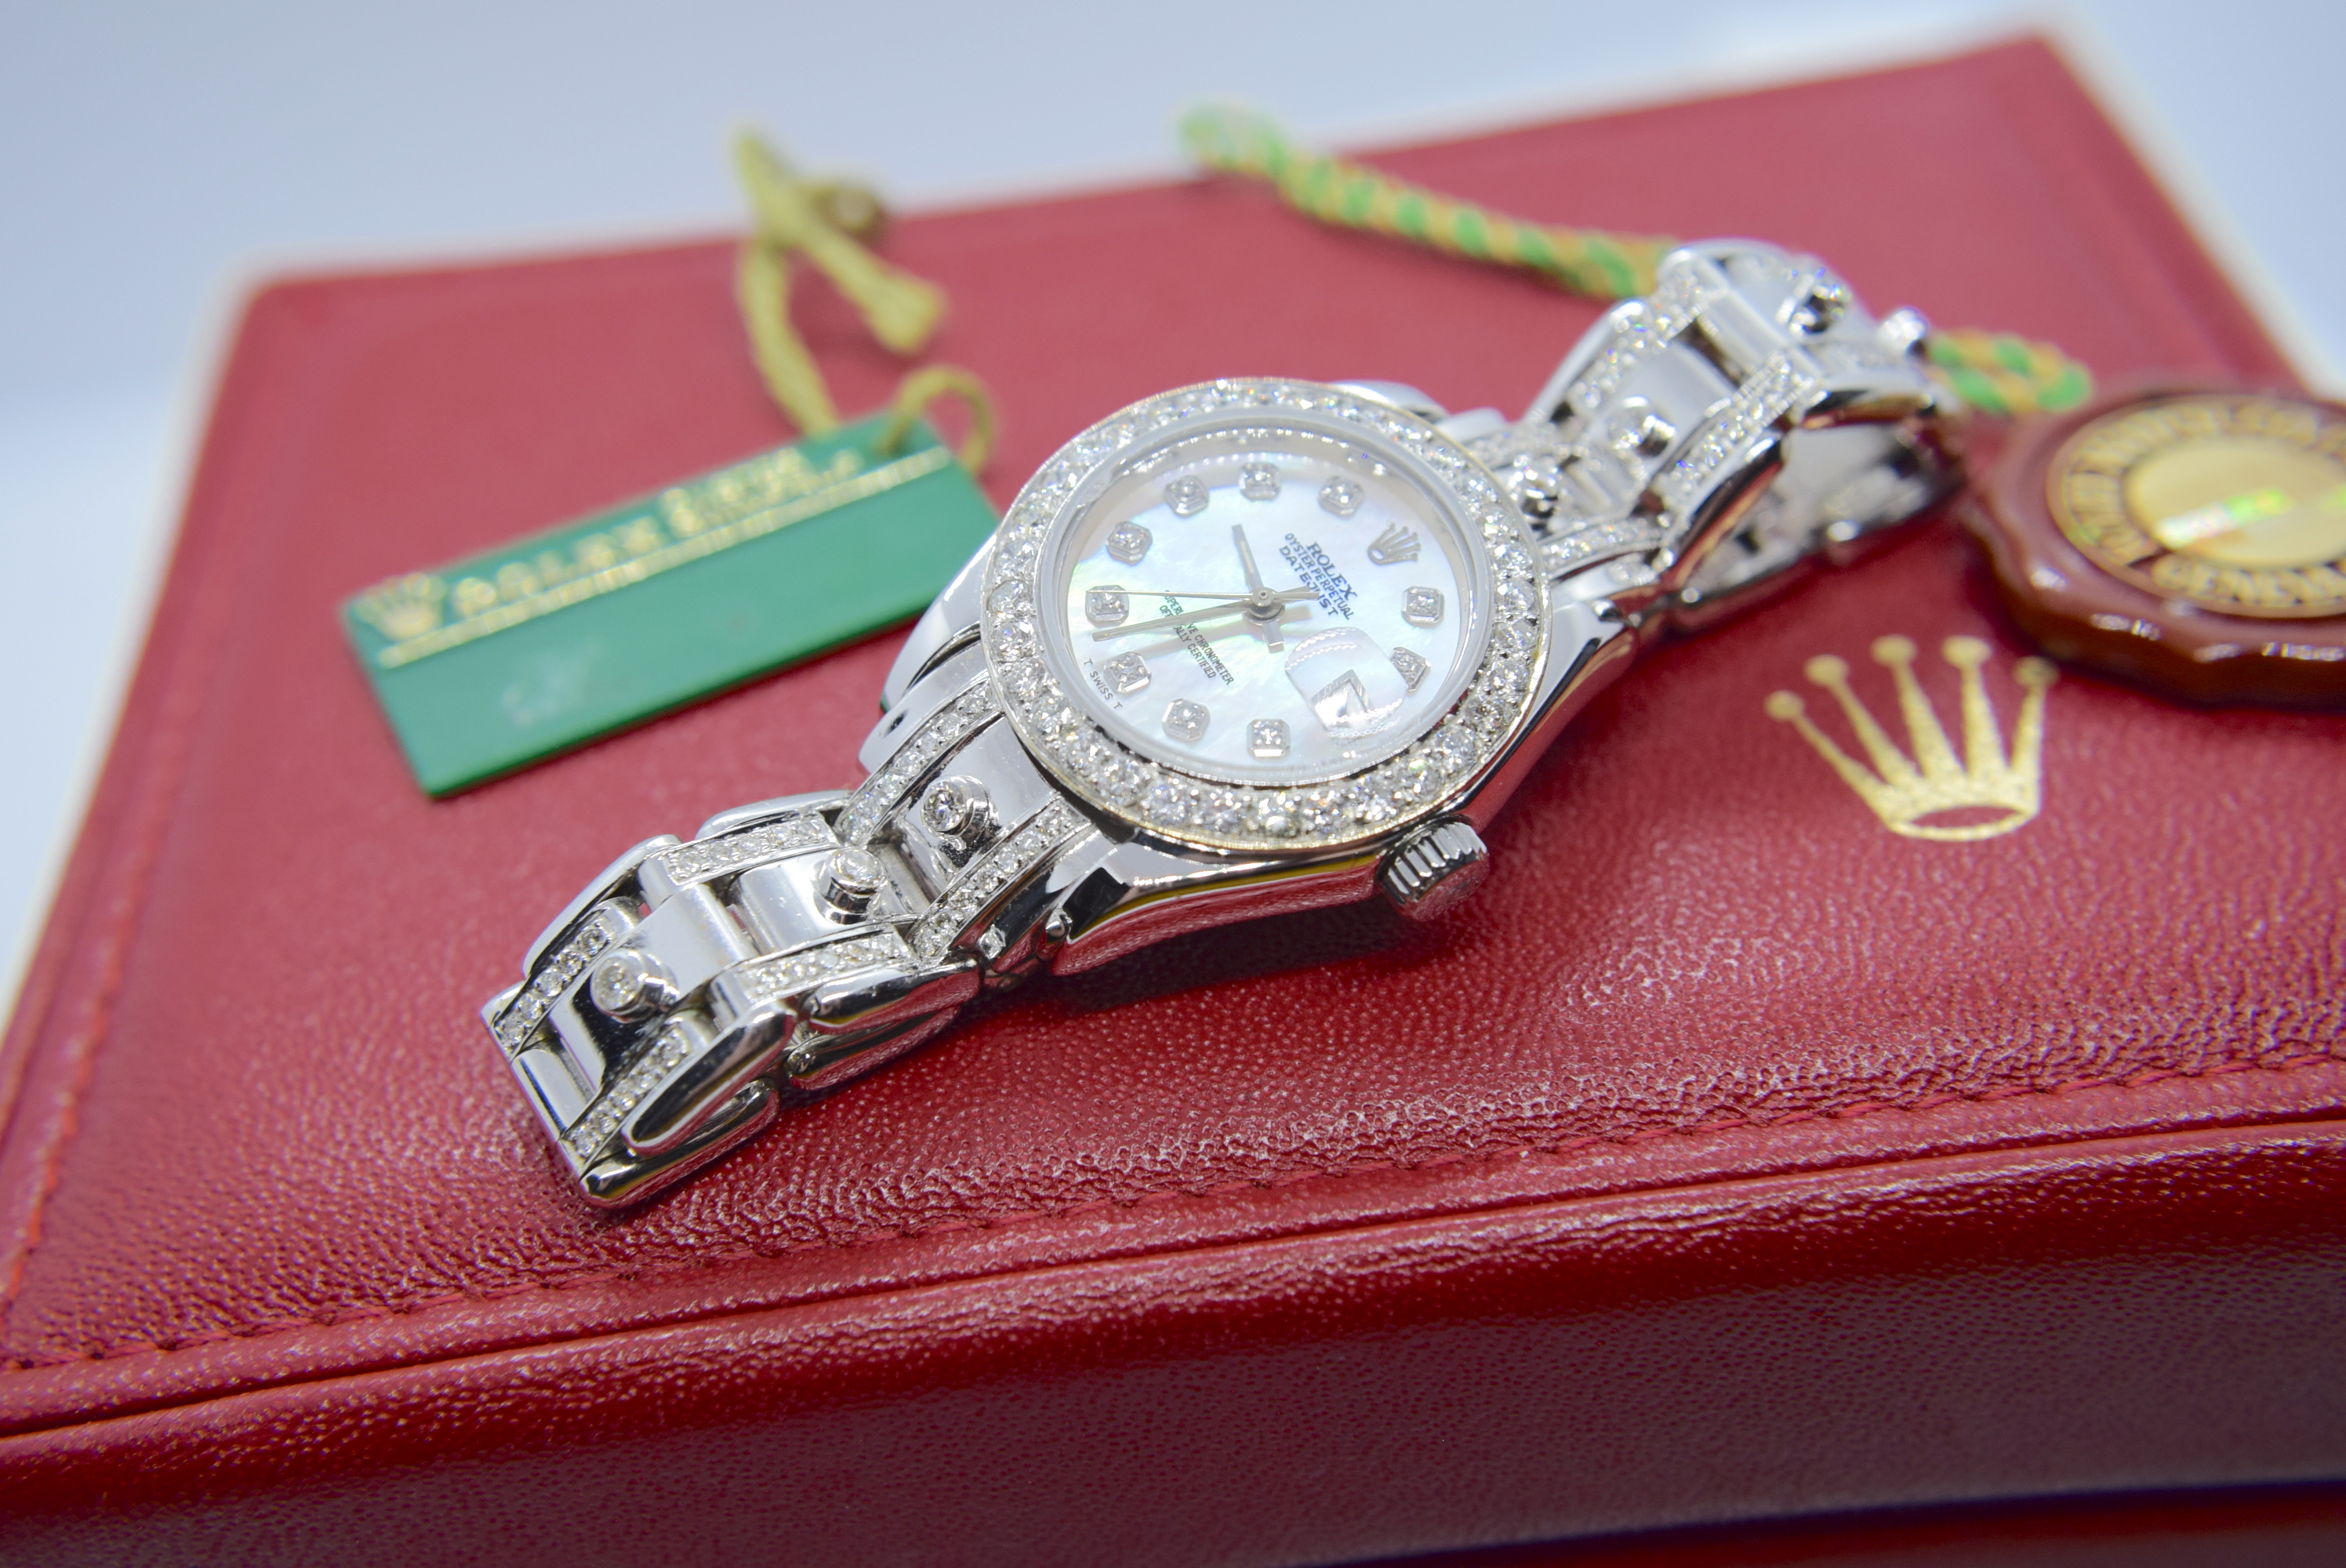 LADIES 5.00CT DAMOND-SET WHITE GOLD PEARLMASTER WATCH MARKED ROLEX DATEJUST - Image 3 of 8